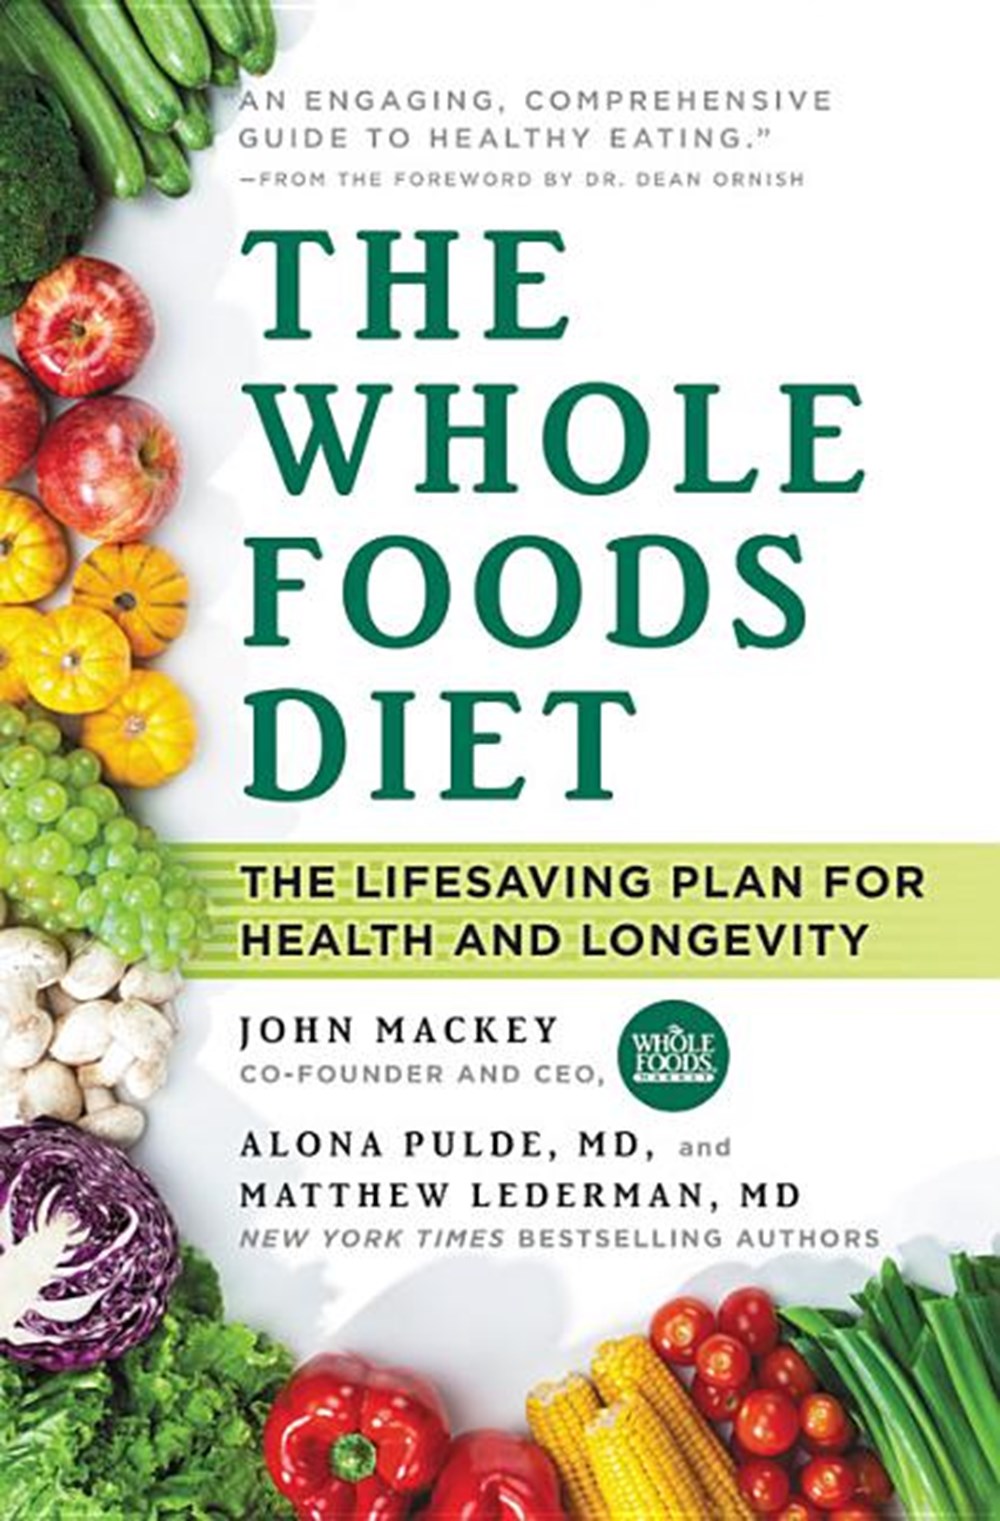 Whole Foods Diet: The Lifesaving Plan for Health and Longevity